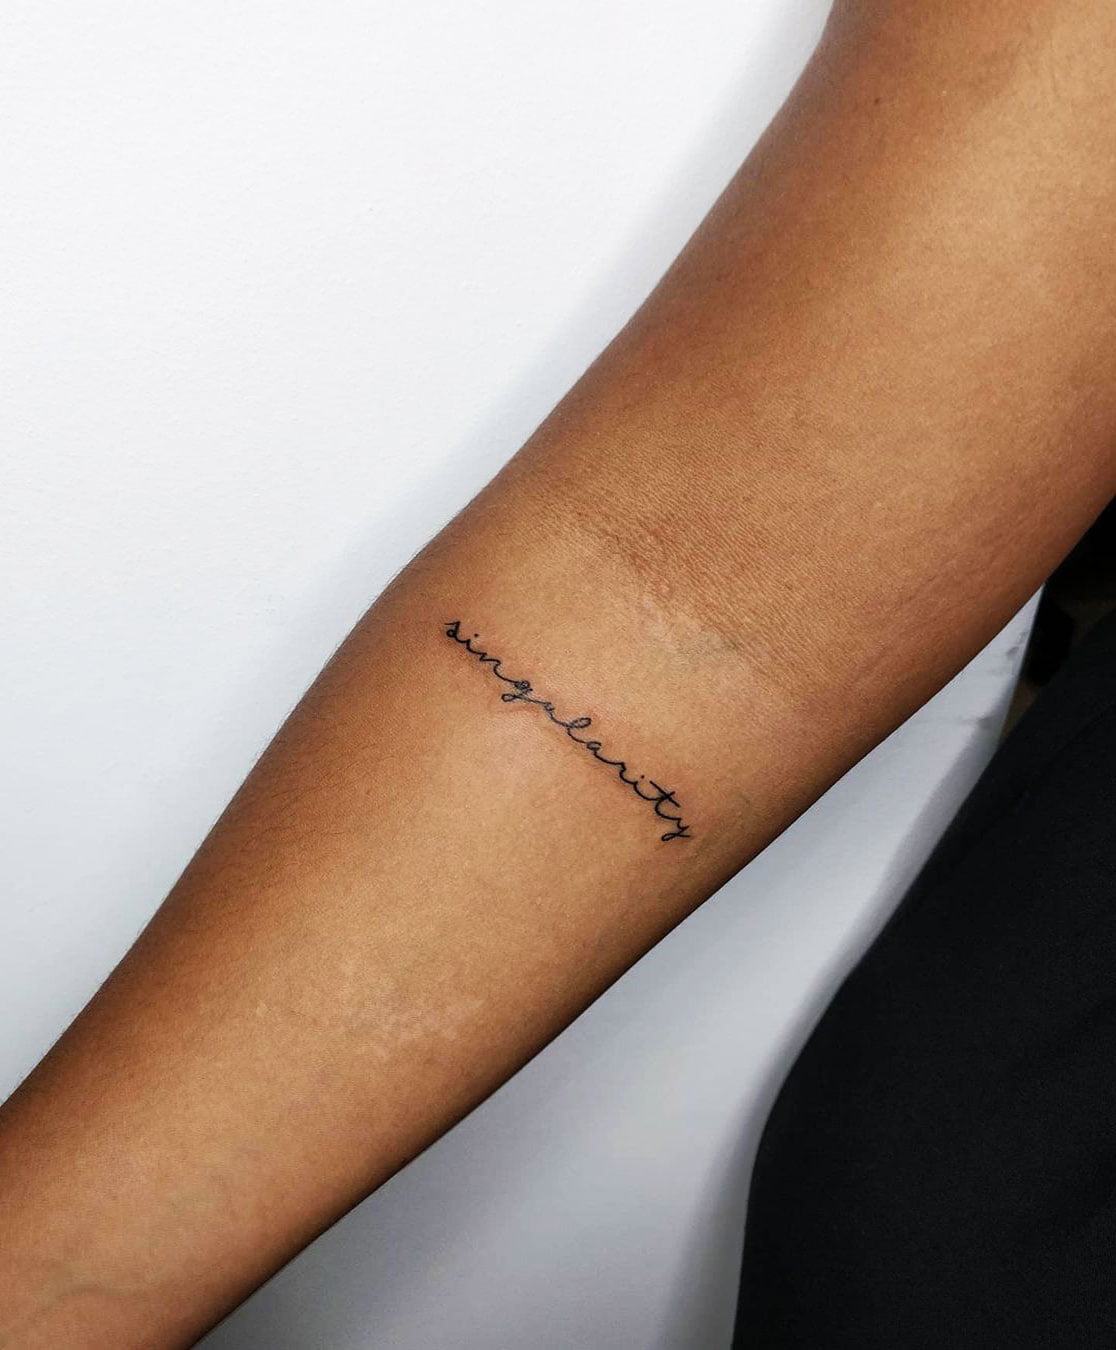 17 Meaningful Small Wrist Tattoos For Women in 2023 23